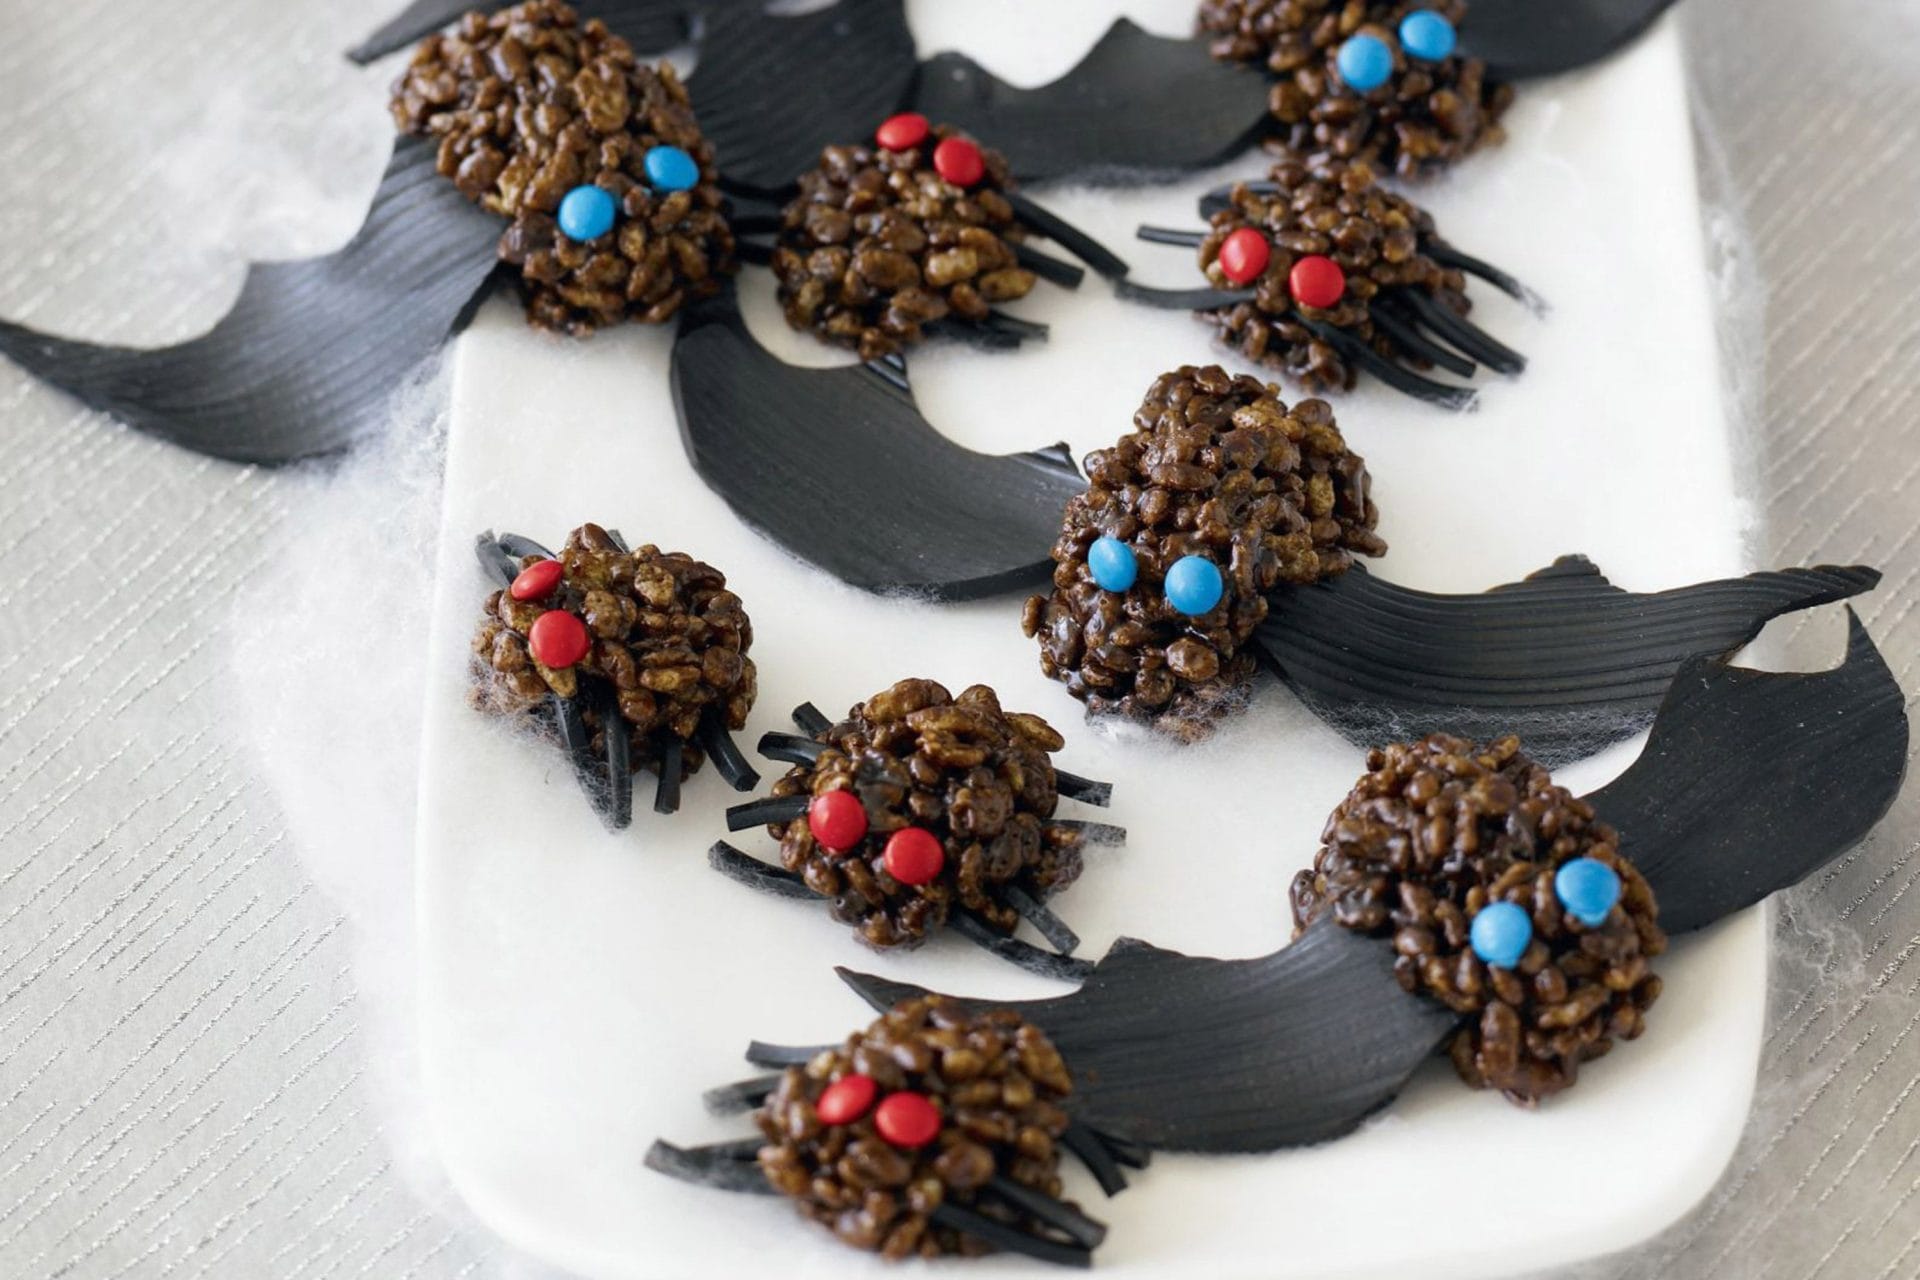 Bat and Spider Chocolate Crackles